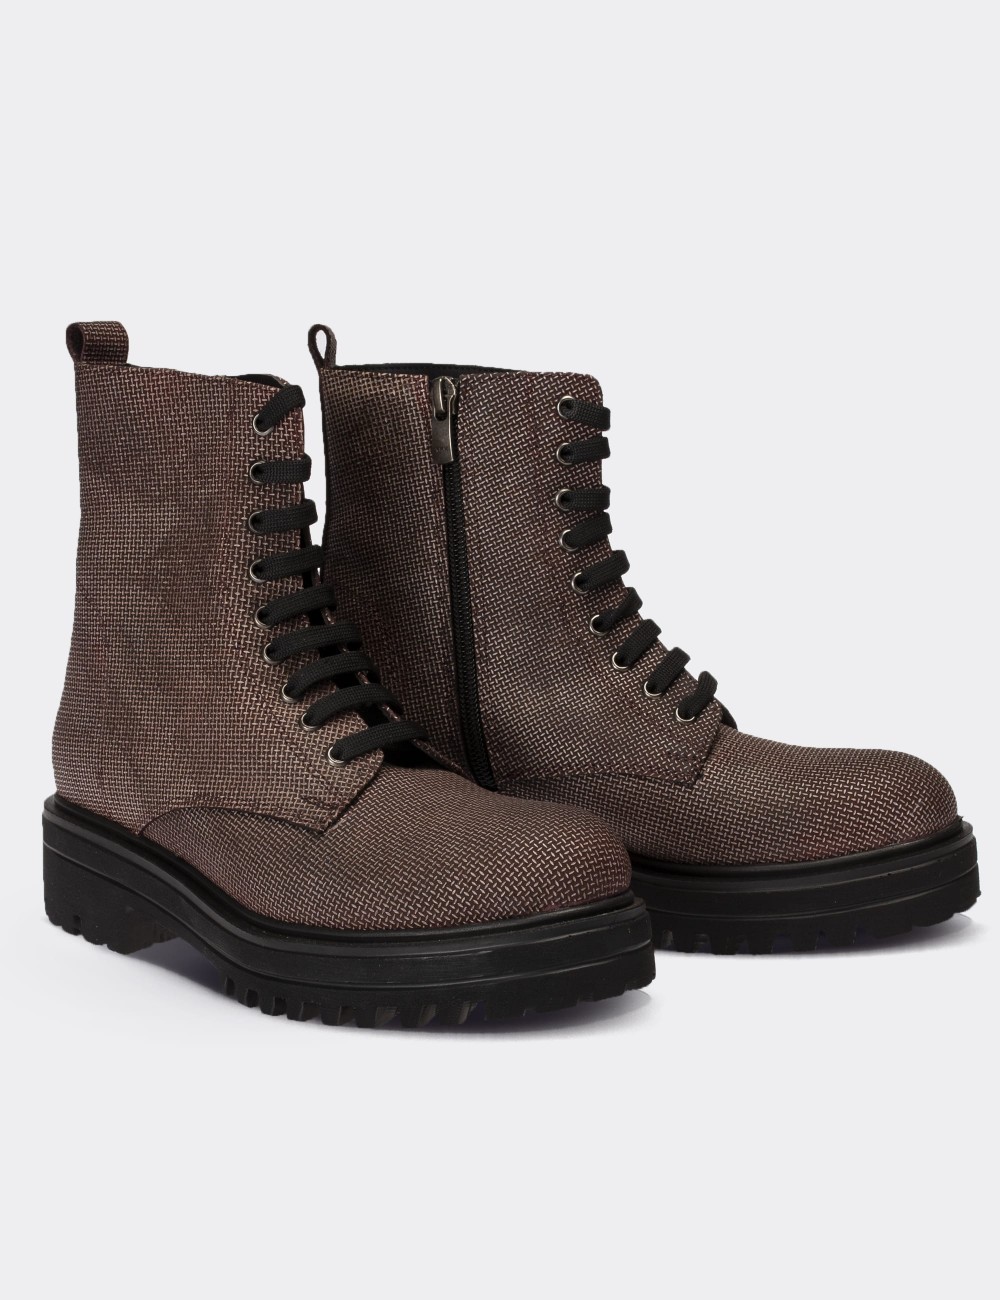 Brown  Leather Postal Boots - 01814ZKHVE20